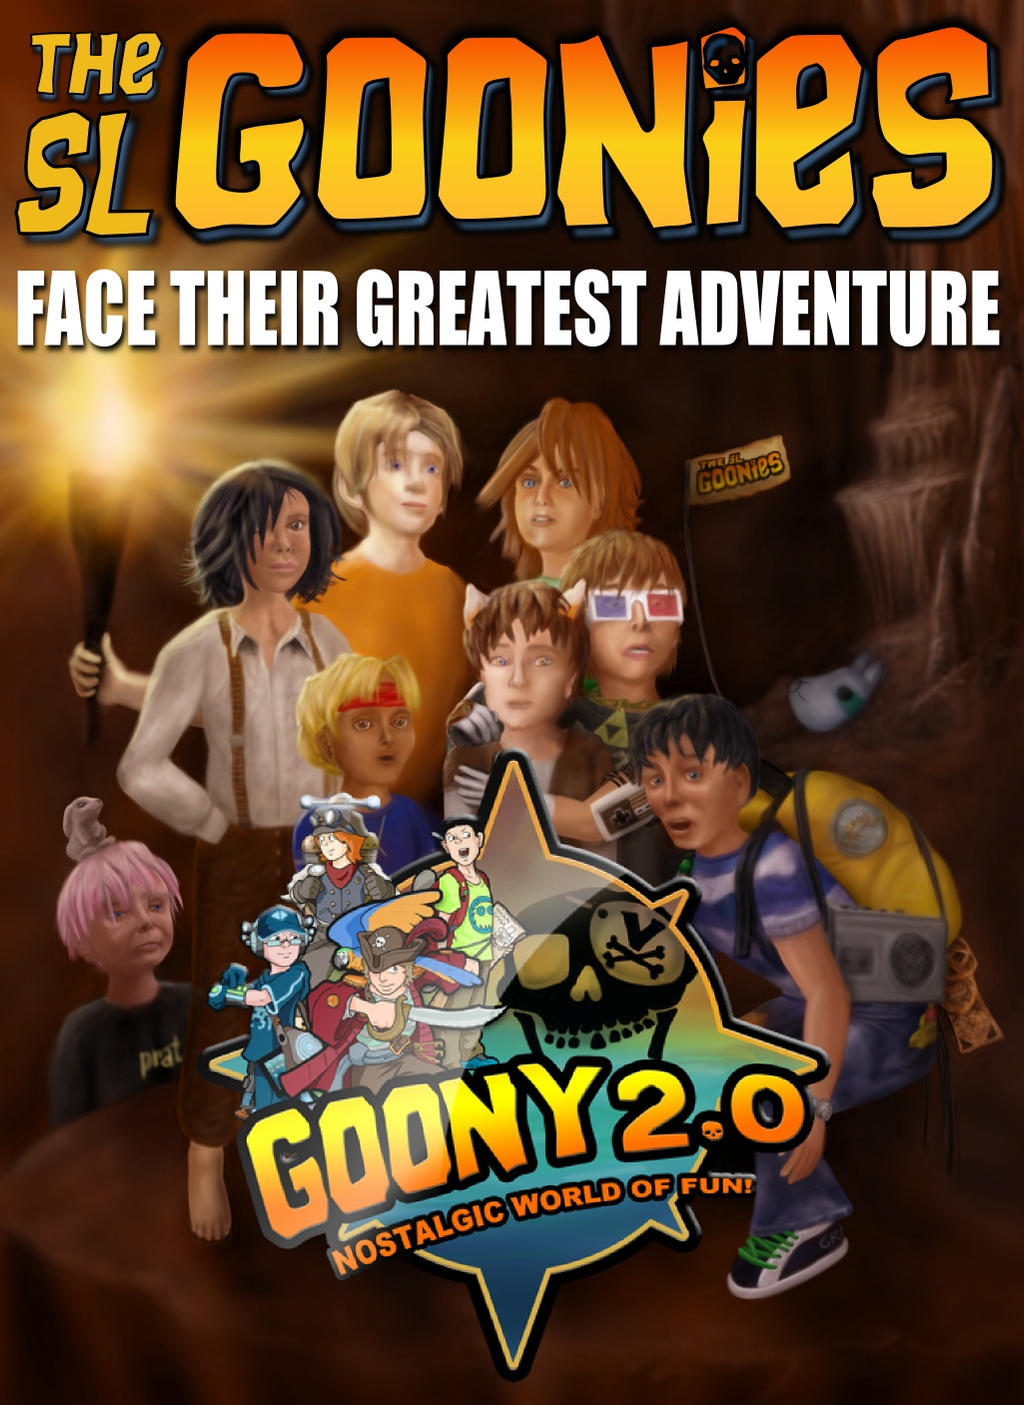 The Second Life Goonies